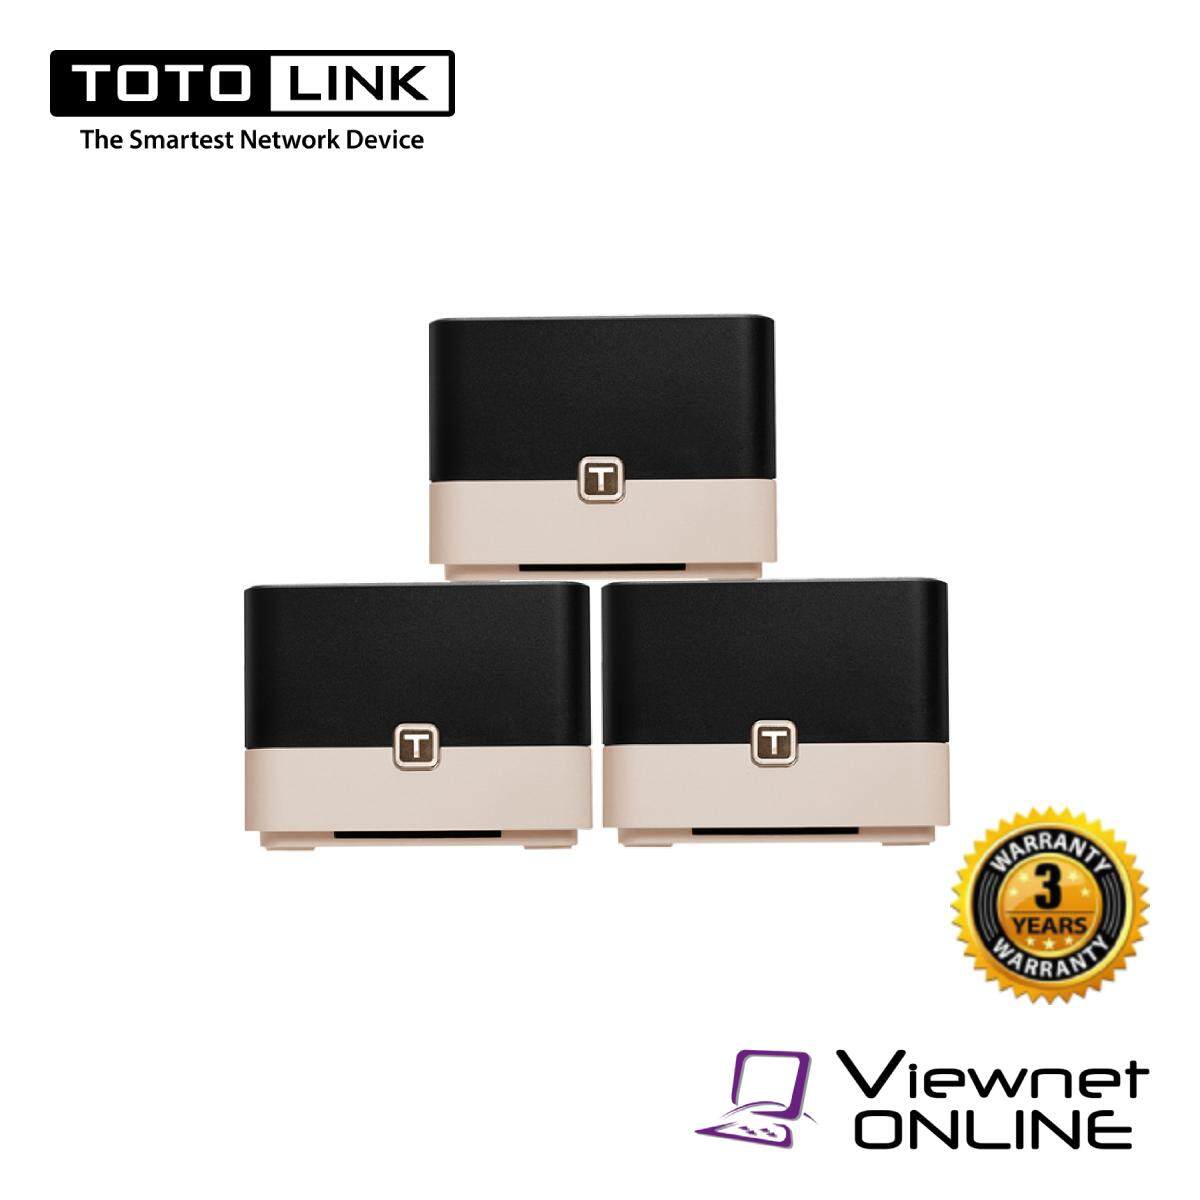 TOTOLINK T10 Gigabit AC1200 Whole Home Mesh WiFi System Router (3 Pack) - Dual Band, MU-MIMO Technology, Seamless Roaming, Up to 4,500 sq. ft. Coverage , Support TM Uniif , Time Fibre , Maxis Fibre